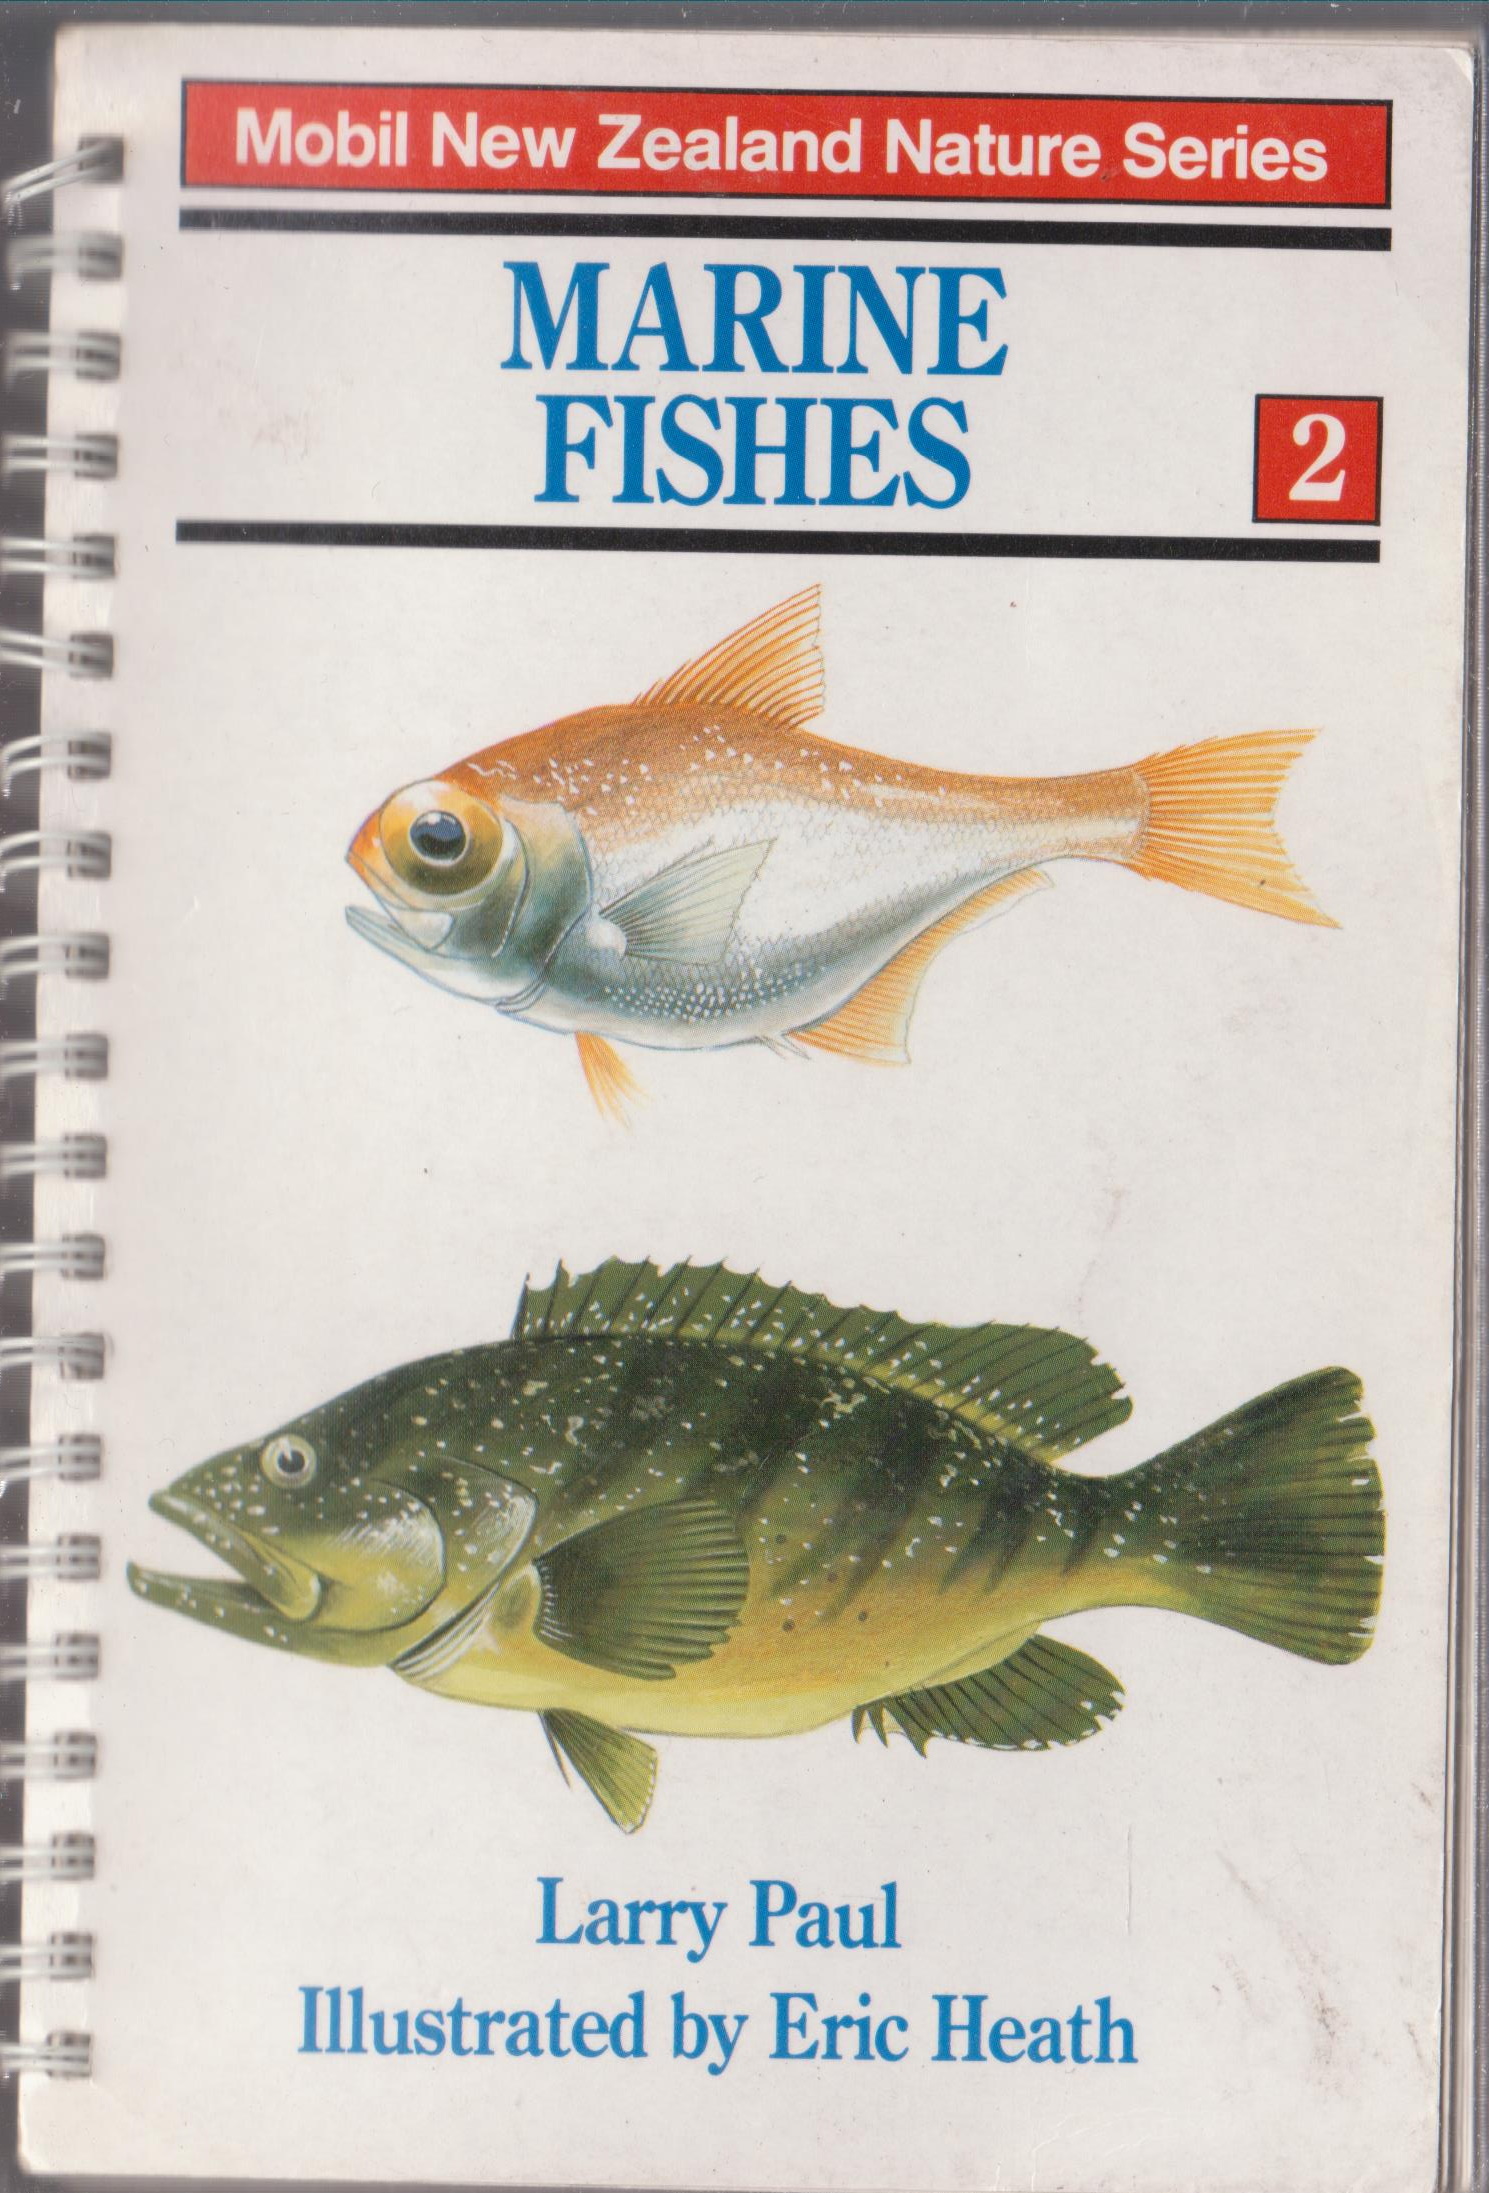 cover image of Mobil New Zealand Nature Series Marine Fishes 2, for sale in New Zealand 